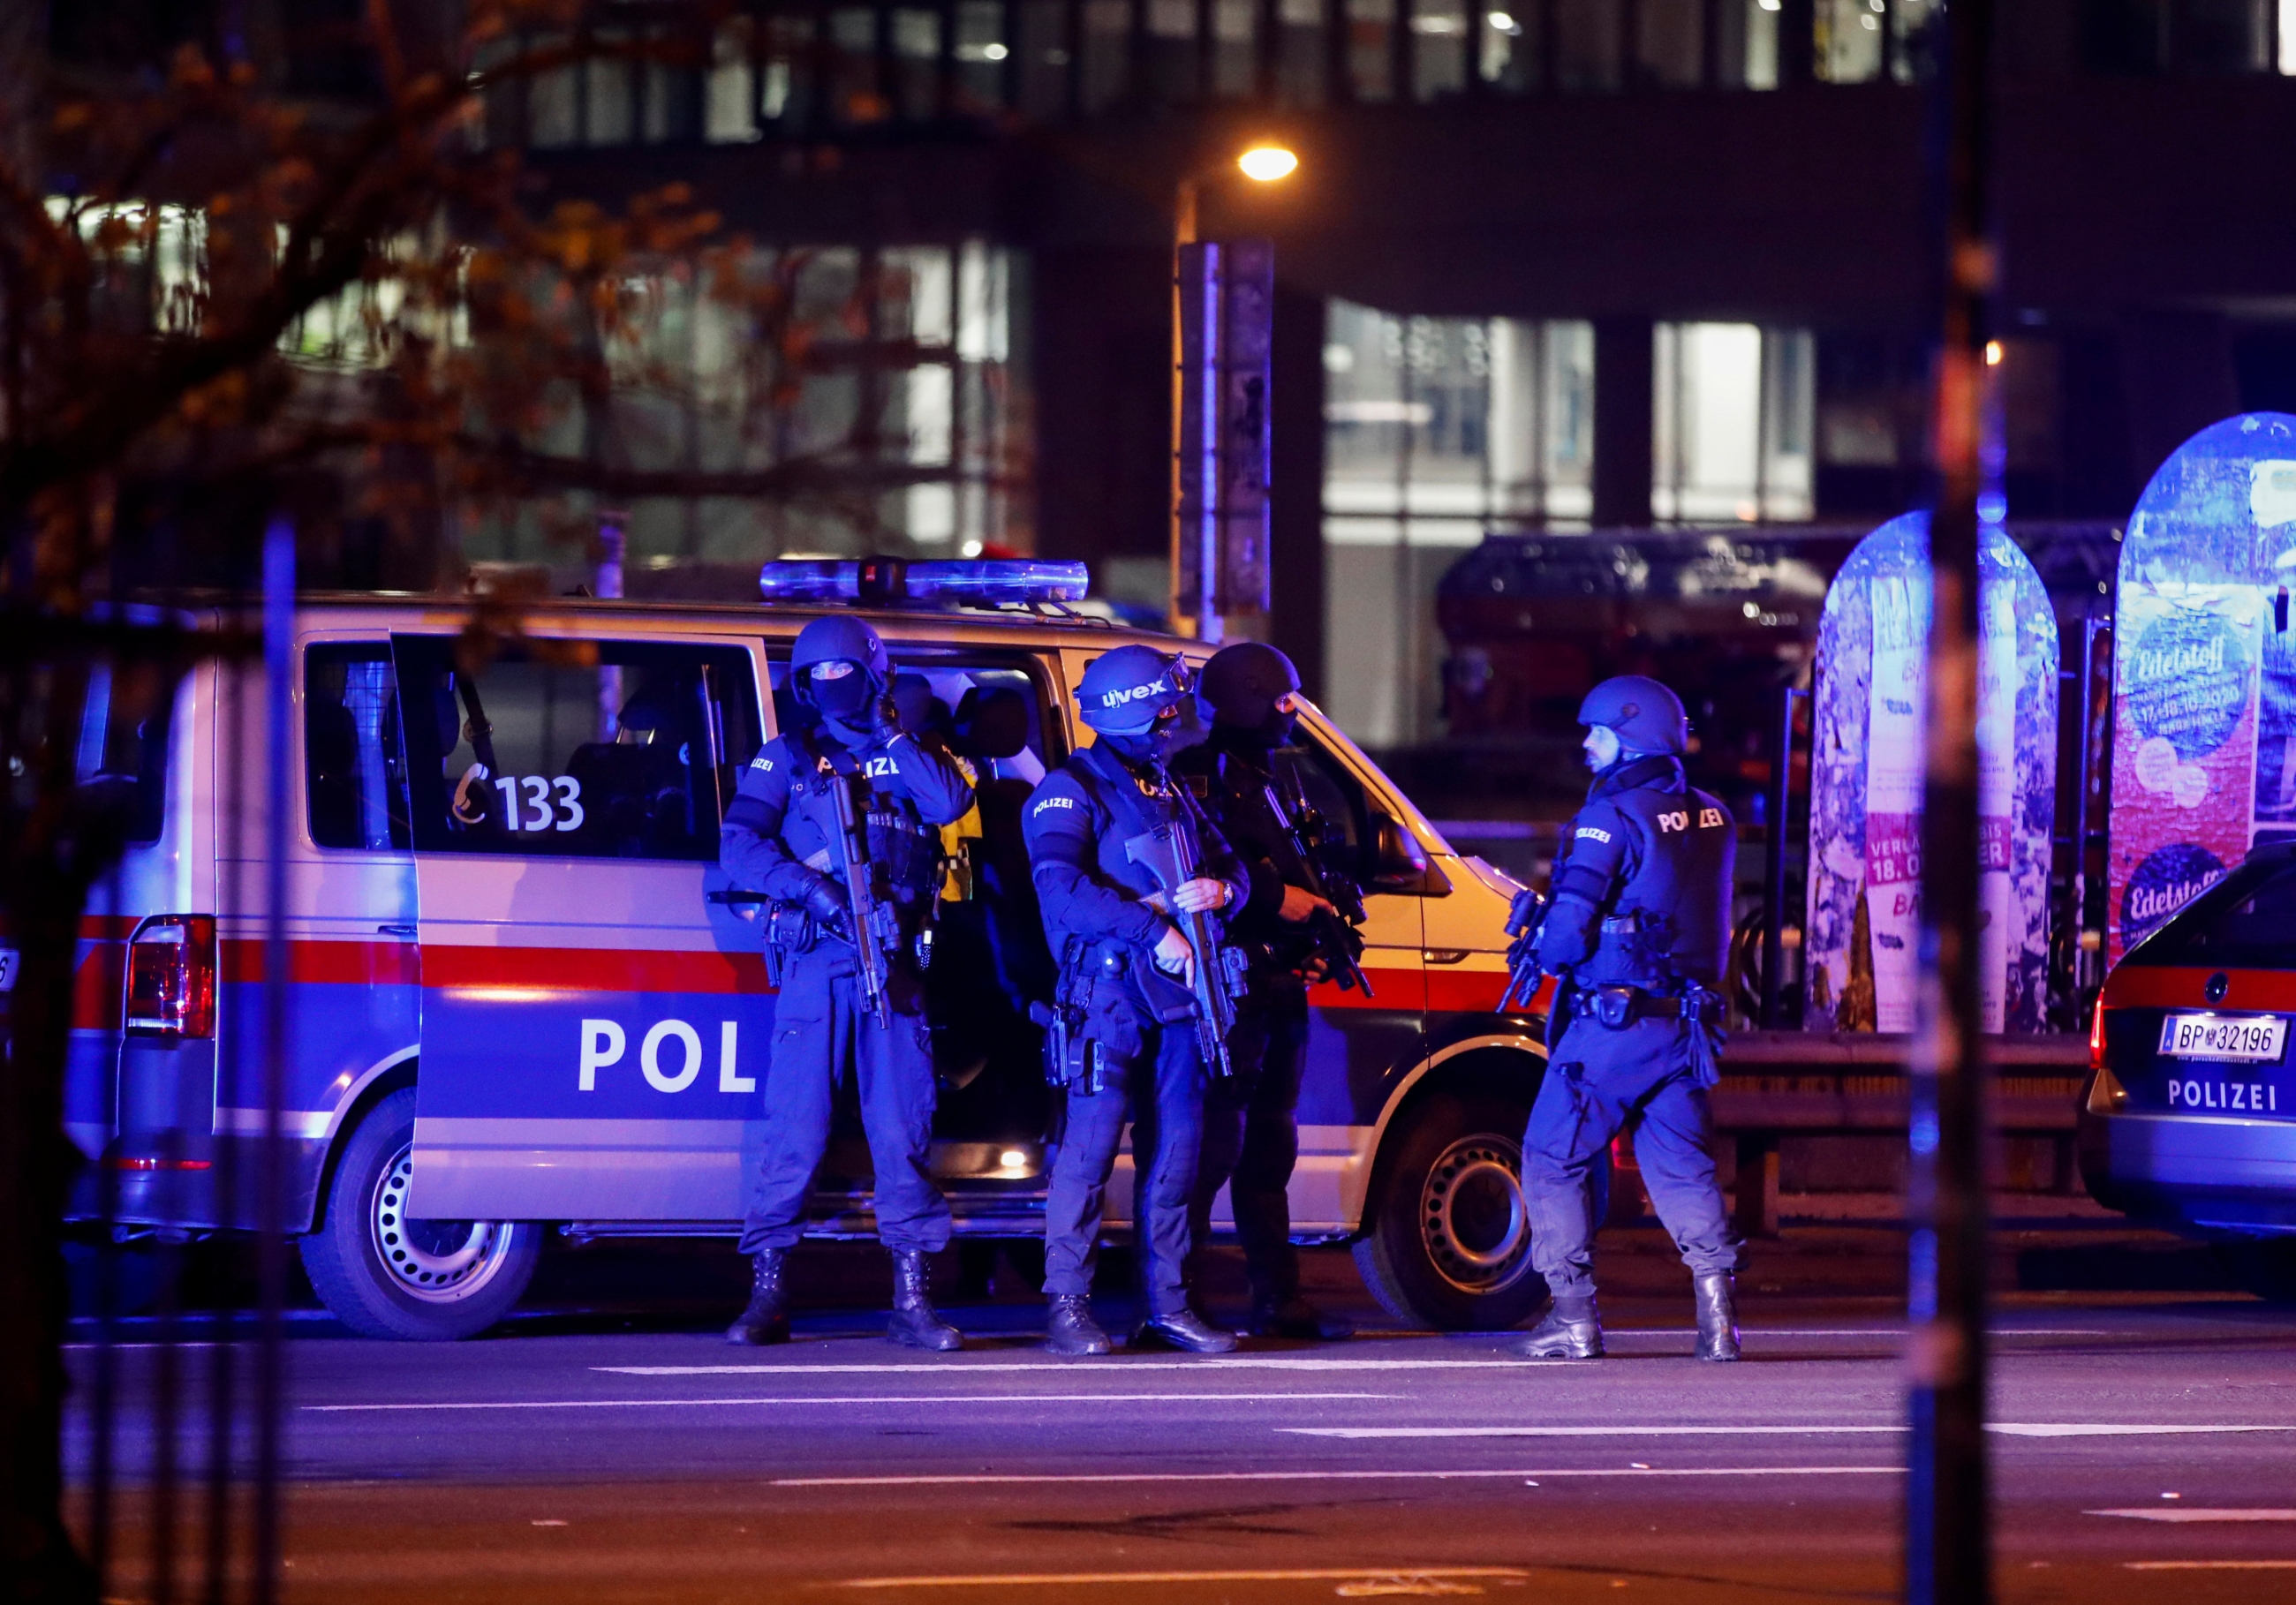 Police officers stand guard on a street after exchanges of gunfire in Vienna, Austria on 3 November 2020.